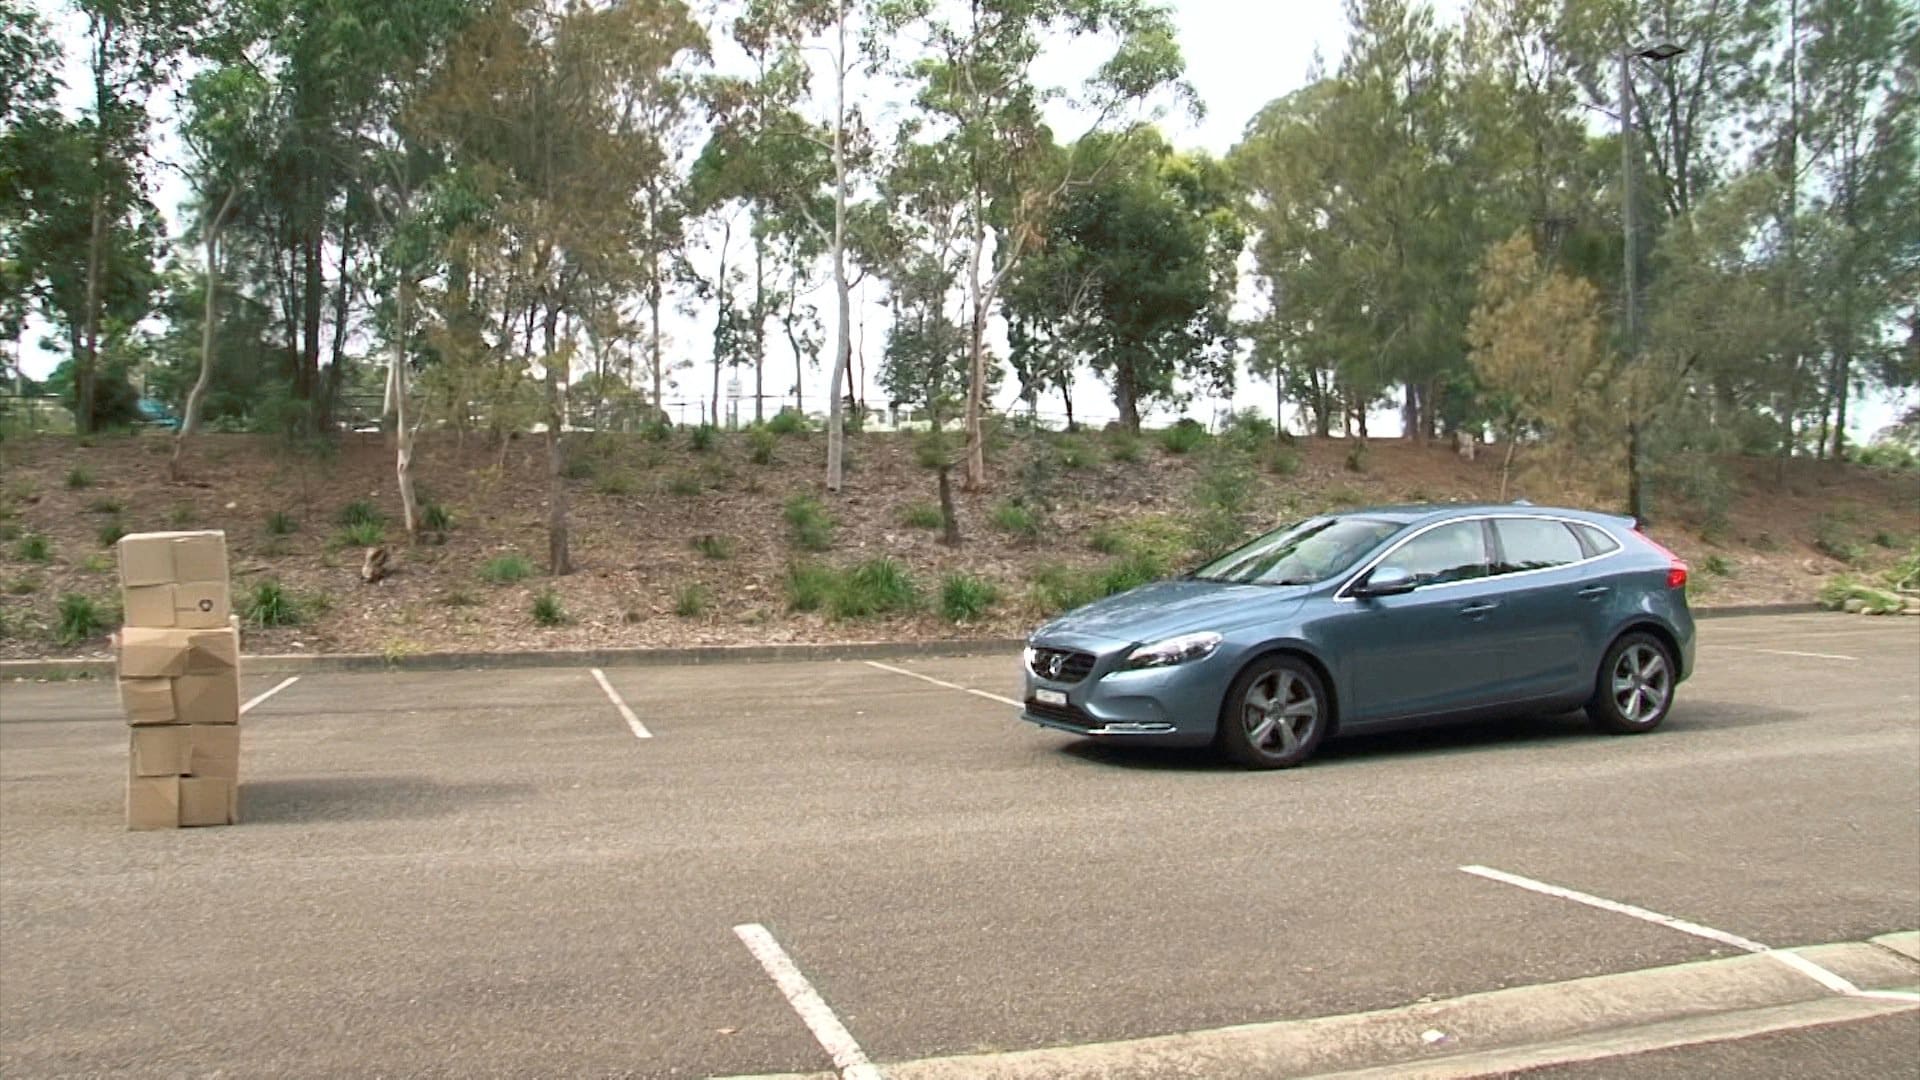 Volvo V40 Safety Video Review - Drive